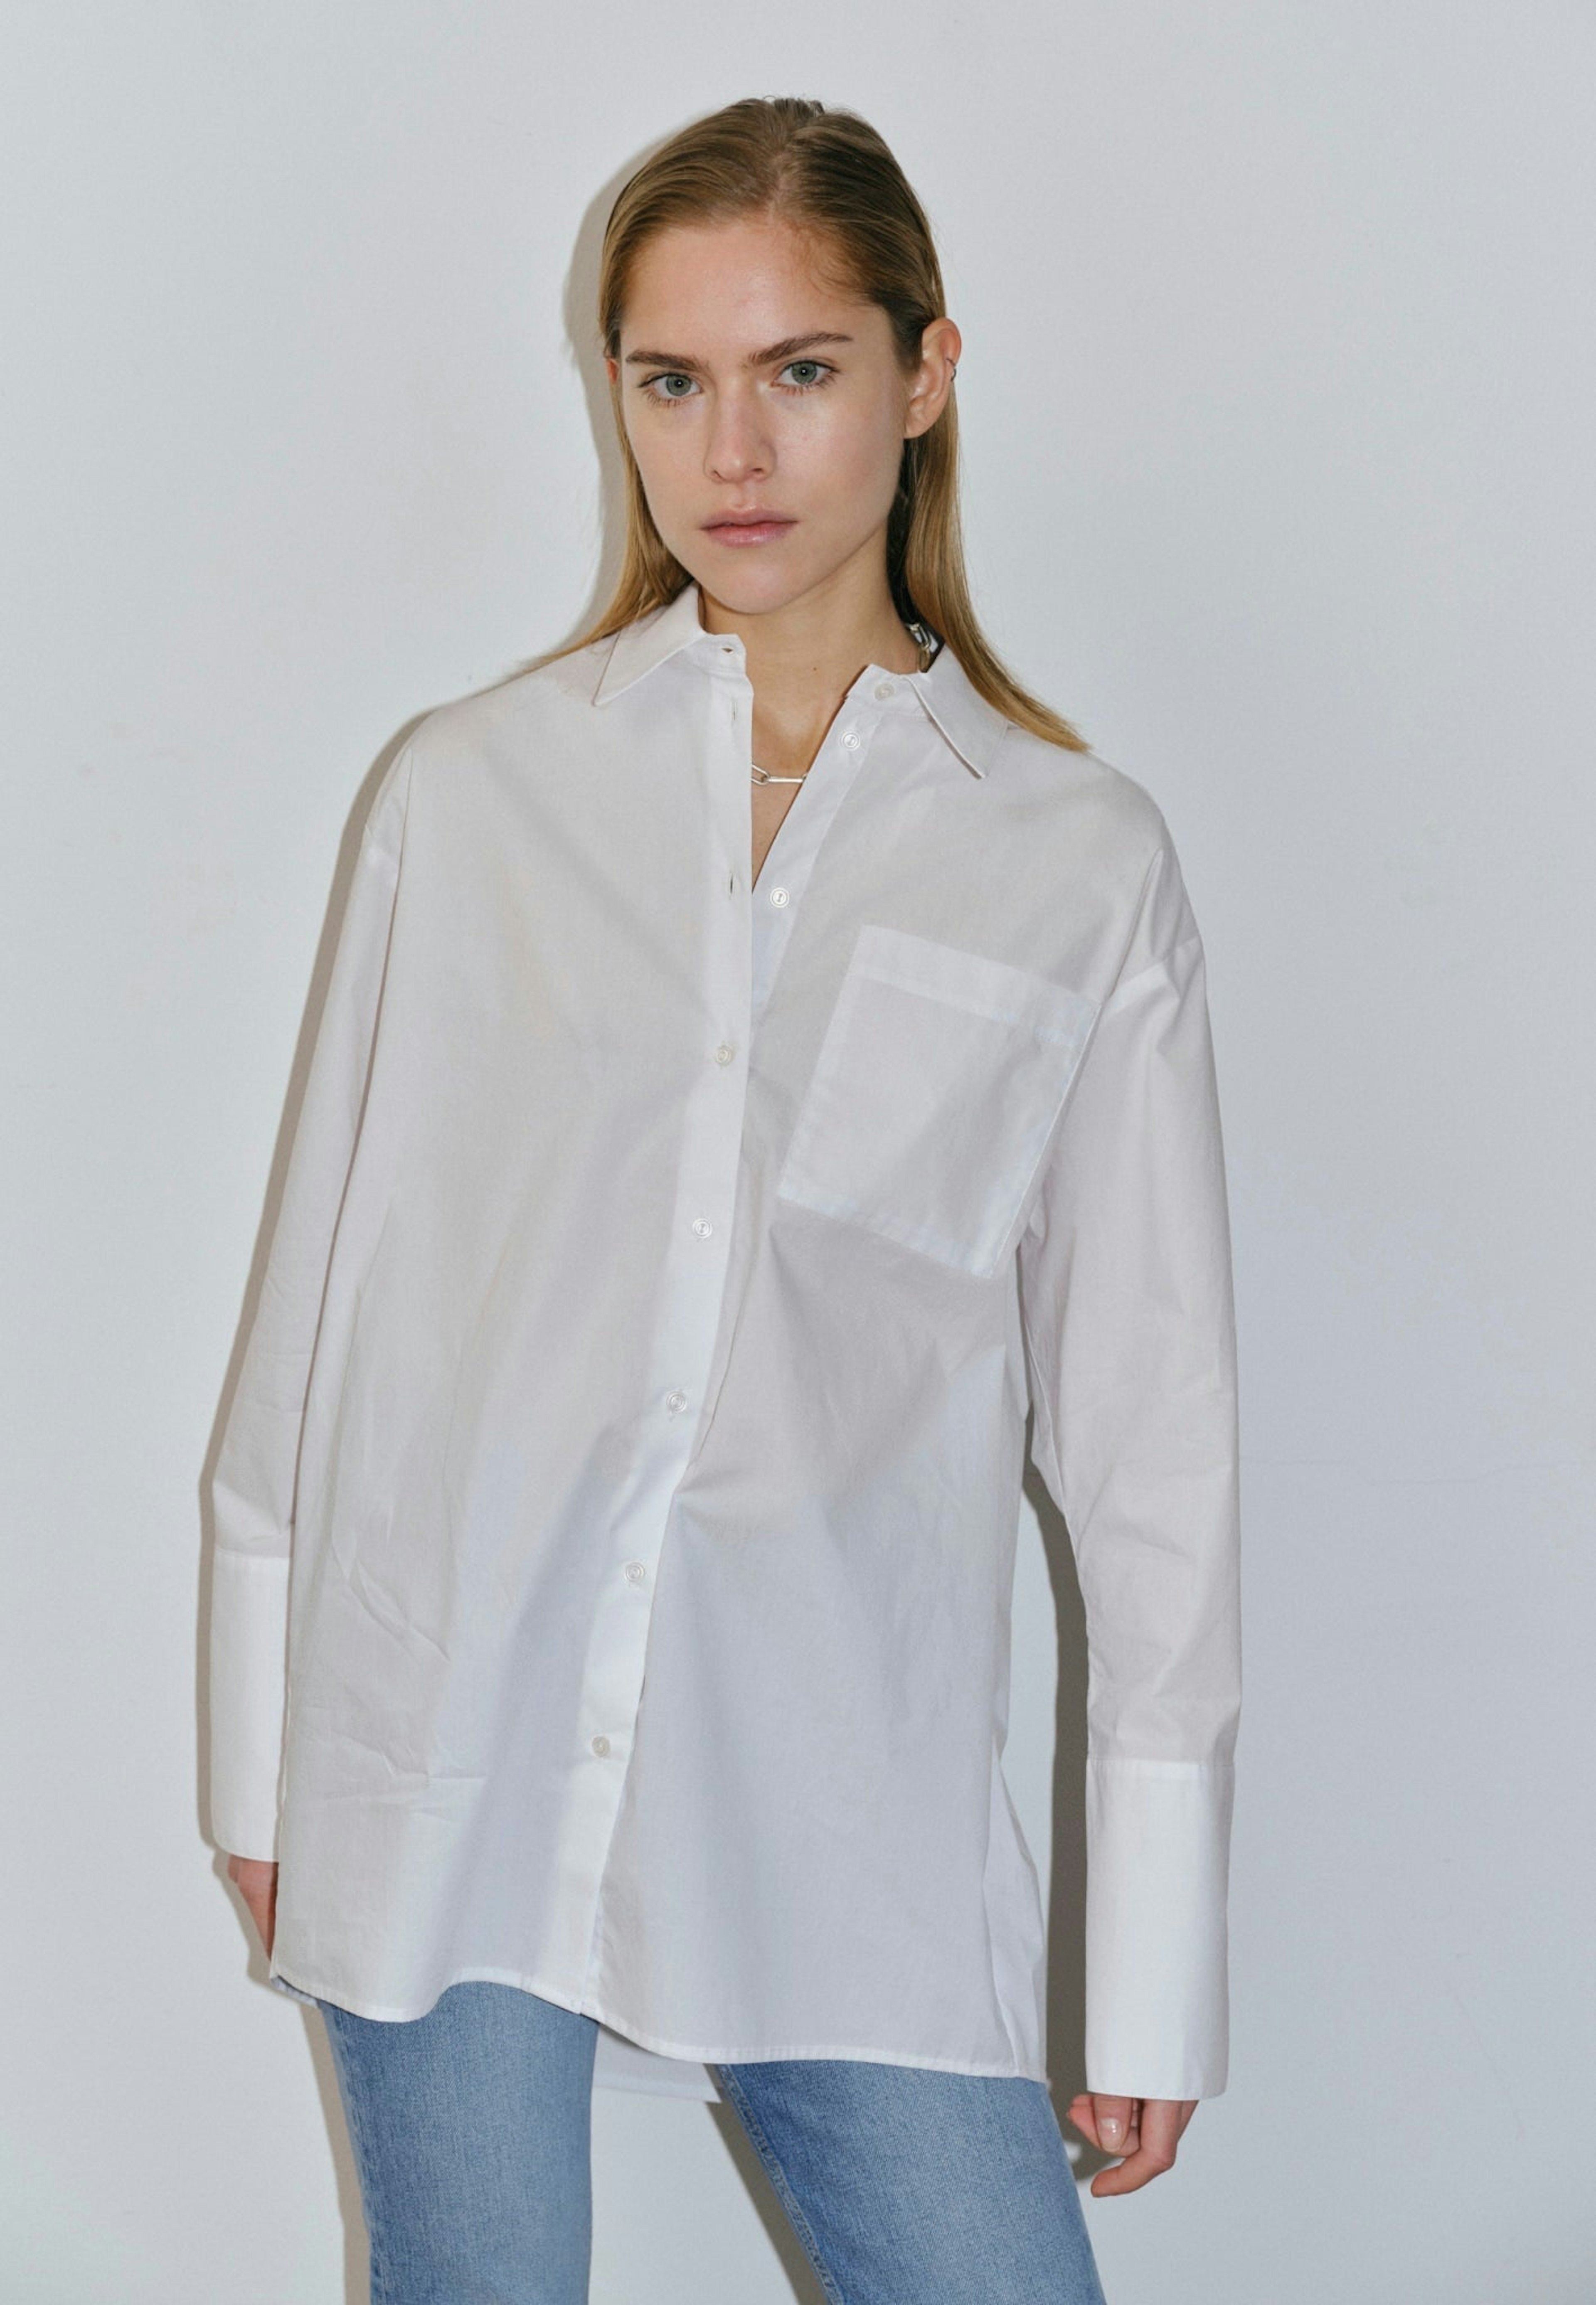 Shop Henrich Shirt - White from HERSKIND at Seezona